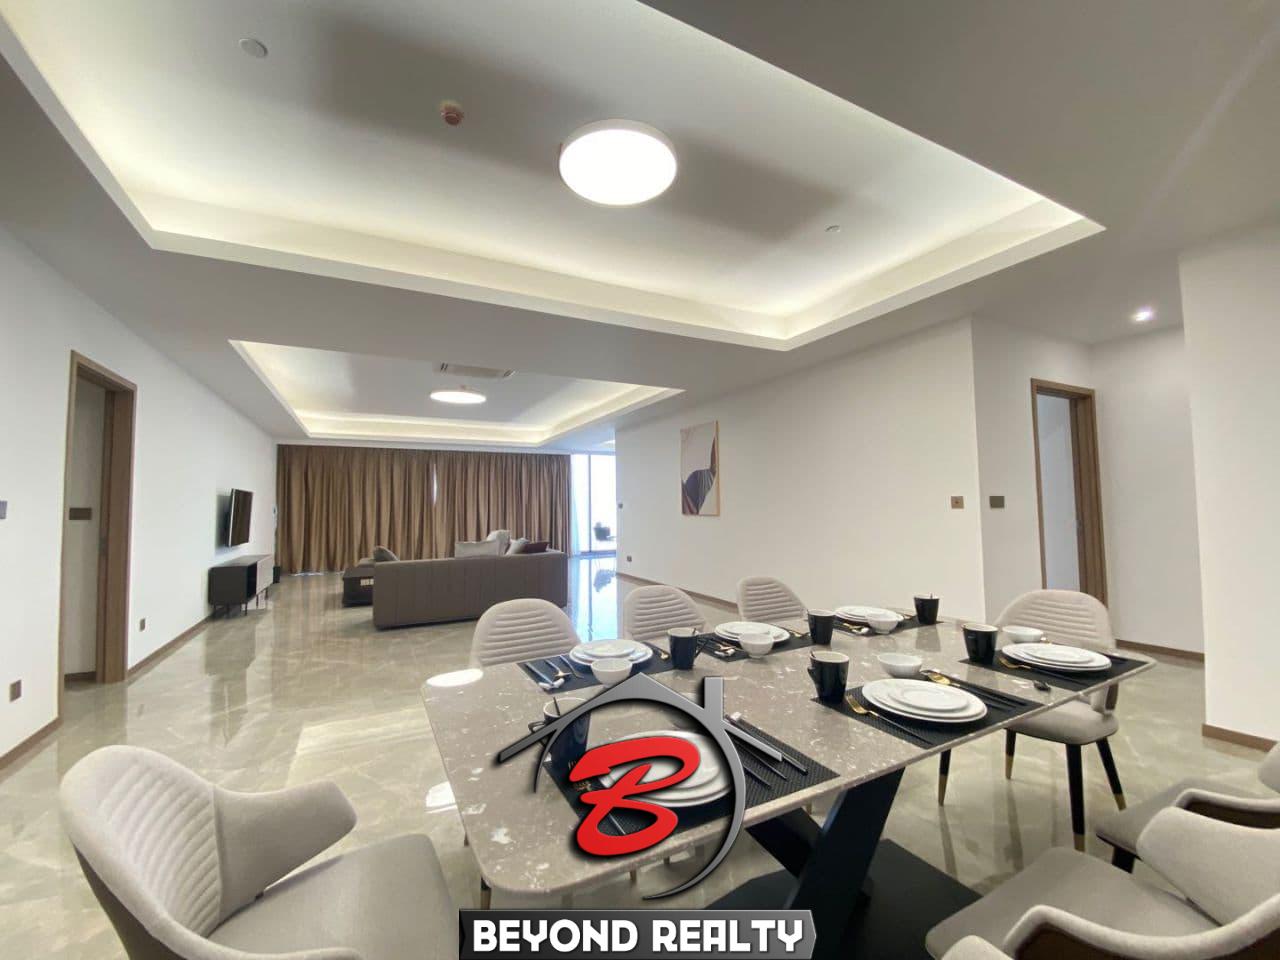 The living room of the 3-bedroom luxury spacious serviced flat for rent